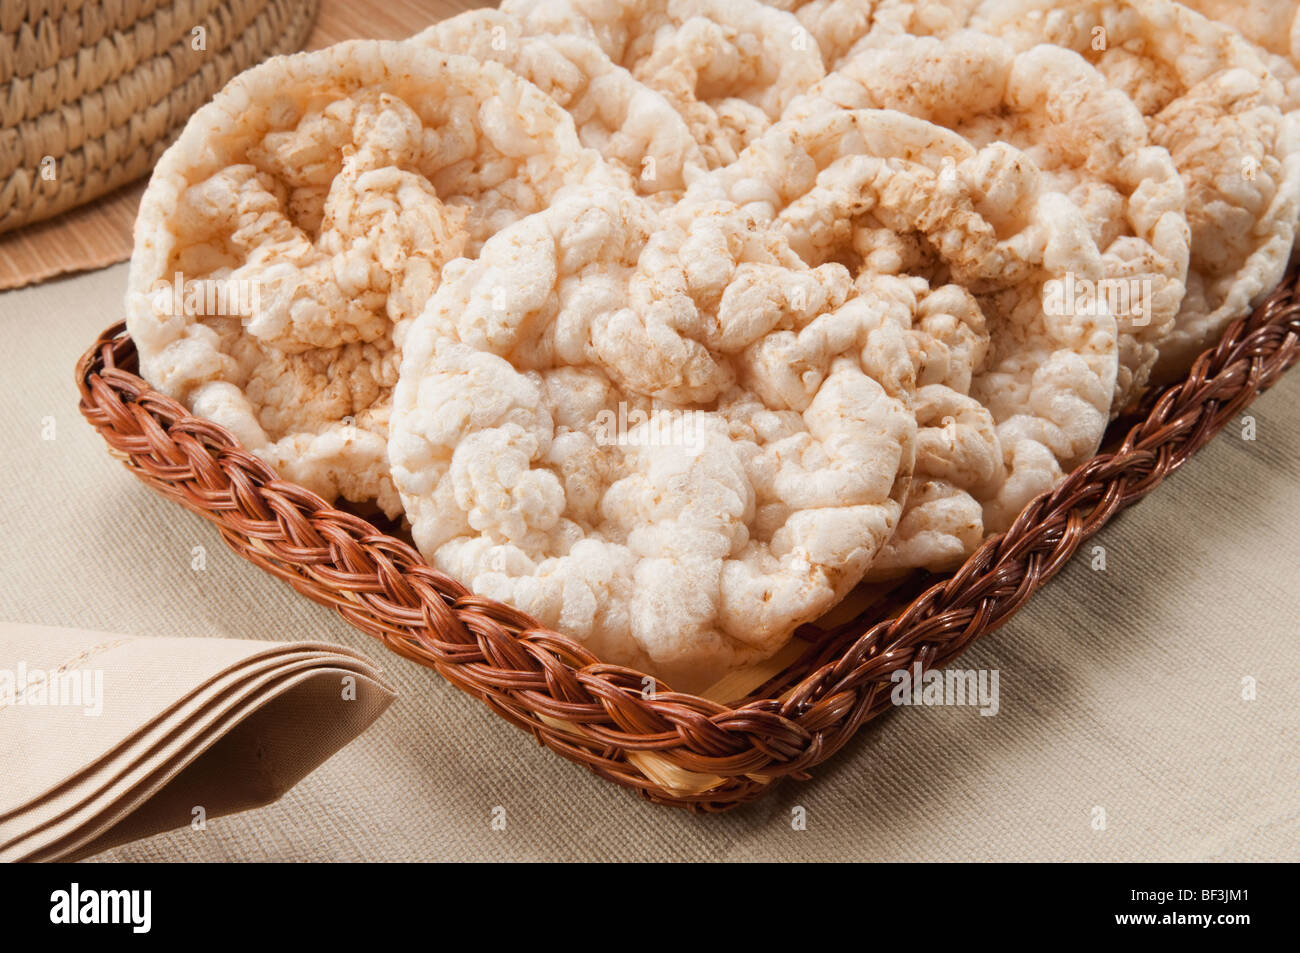 Close-up of a basket full of sweet rice cookies Stock Photo